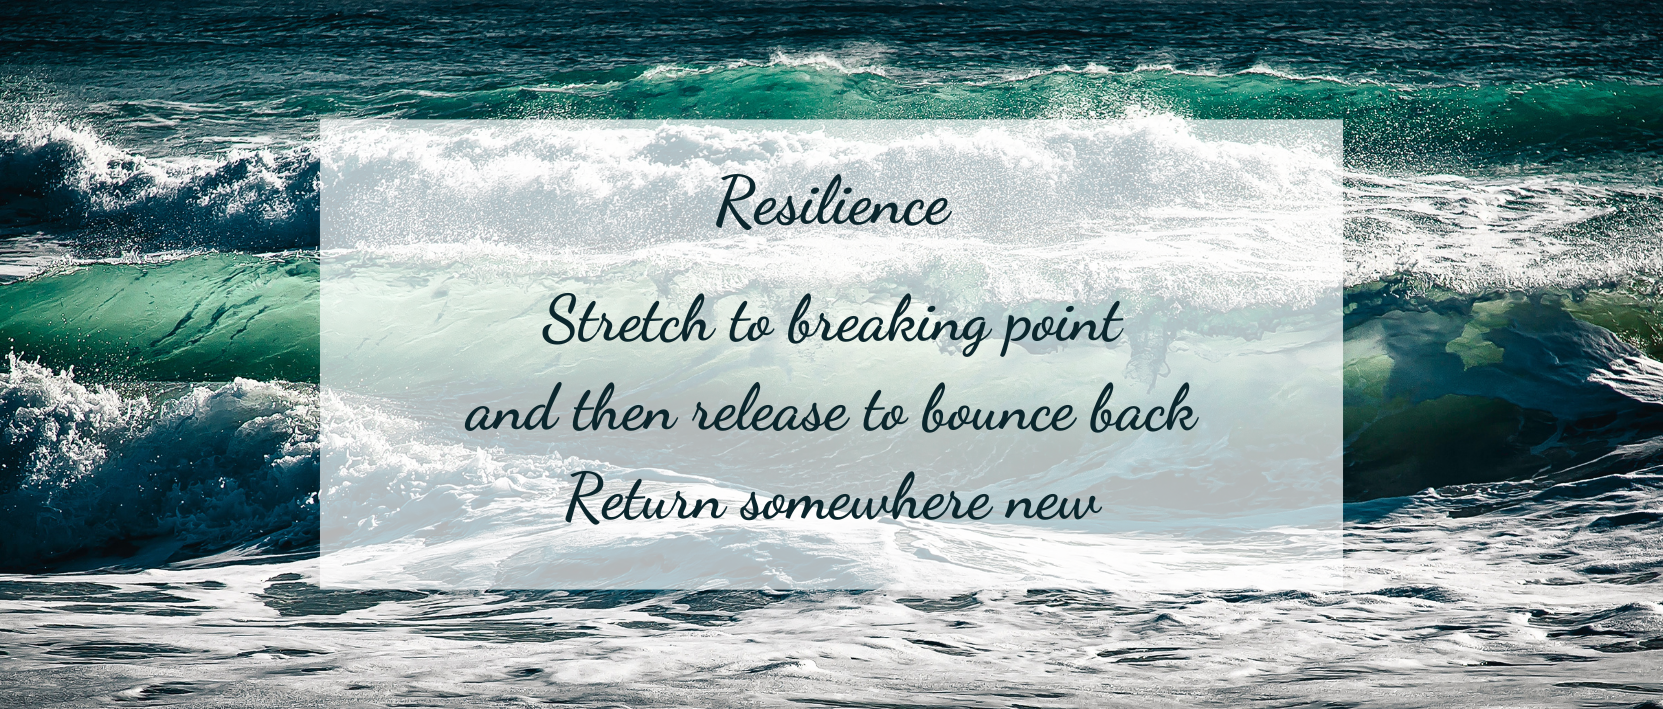 Resilience Stretch to breaking point and then release to bounce back Return somewhere new